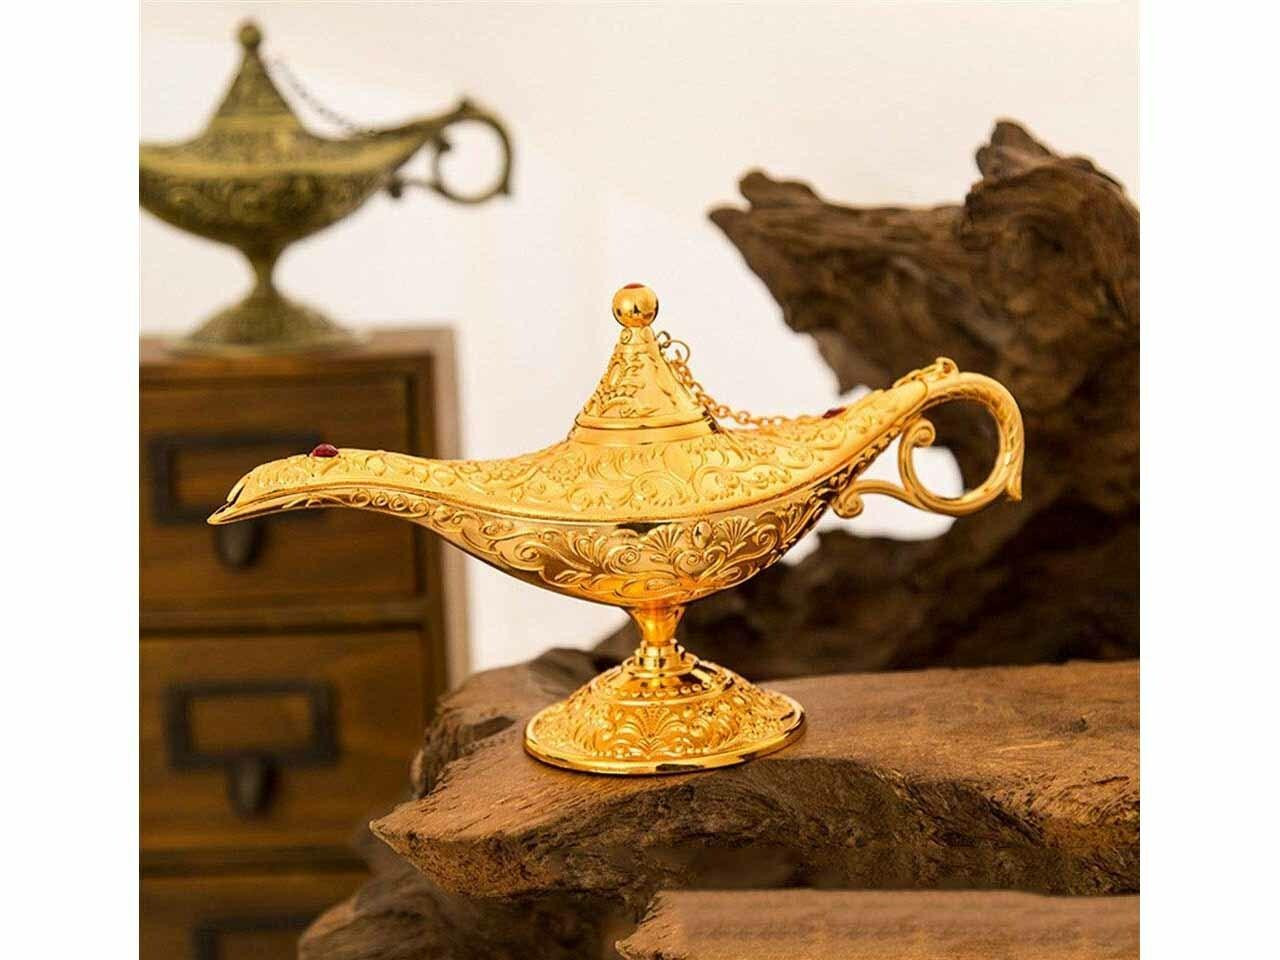 https://cdn11.bigcommerce.com/s-eaczr0f/images/stencil/1280x1280/products/3882/31360/golden-color-magic-aladdin-lamp-souvenir-from-dubai-gift-from-united-arab-emirates__33785.1638174025.jpg?c=2